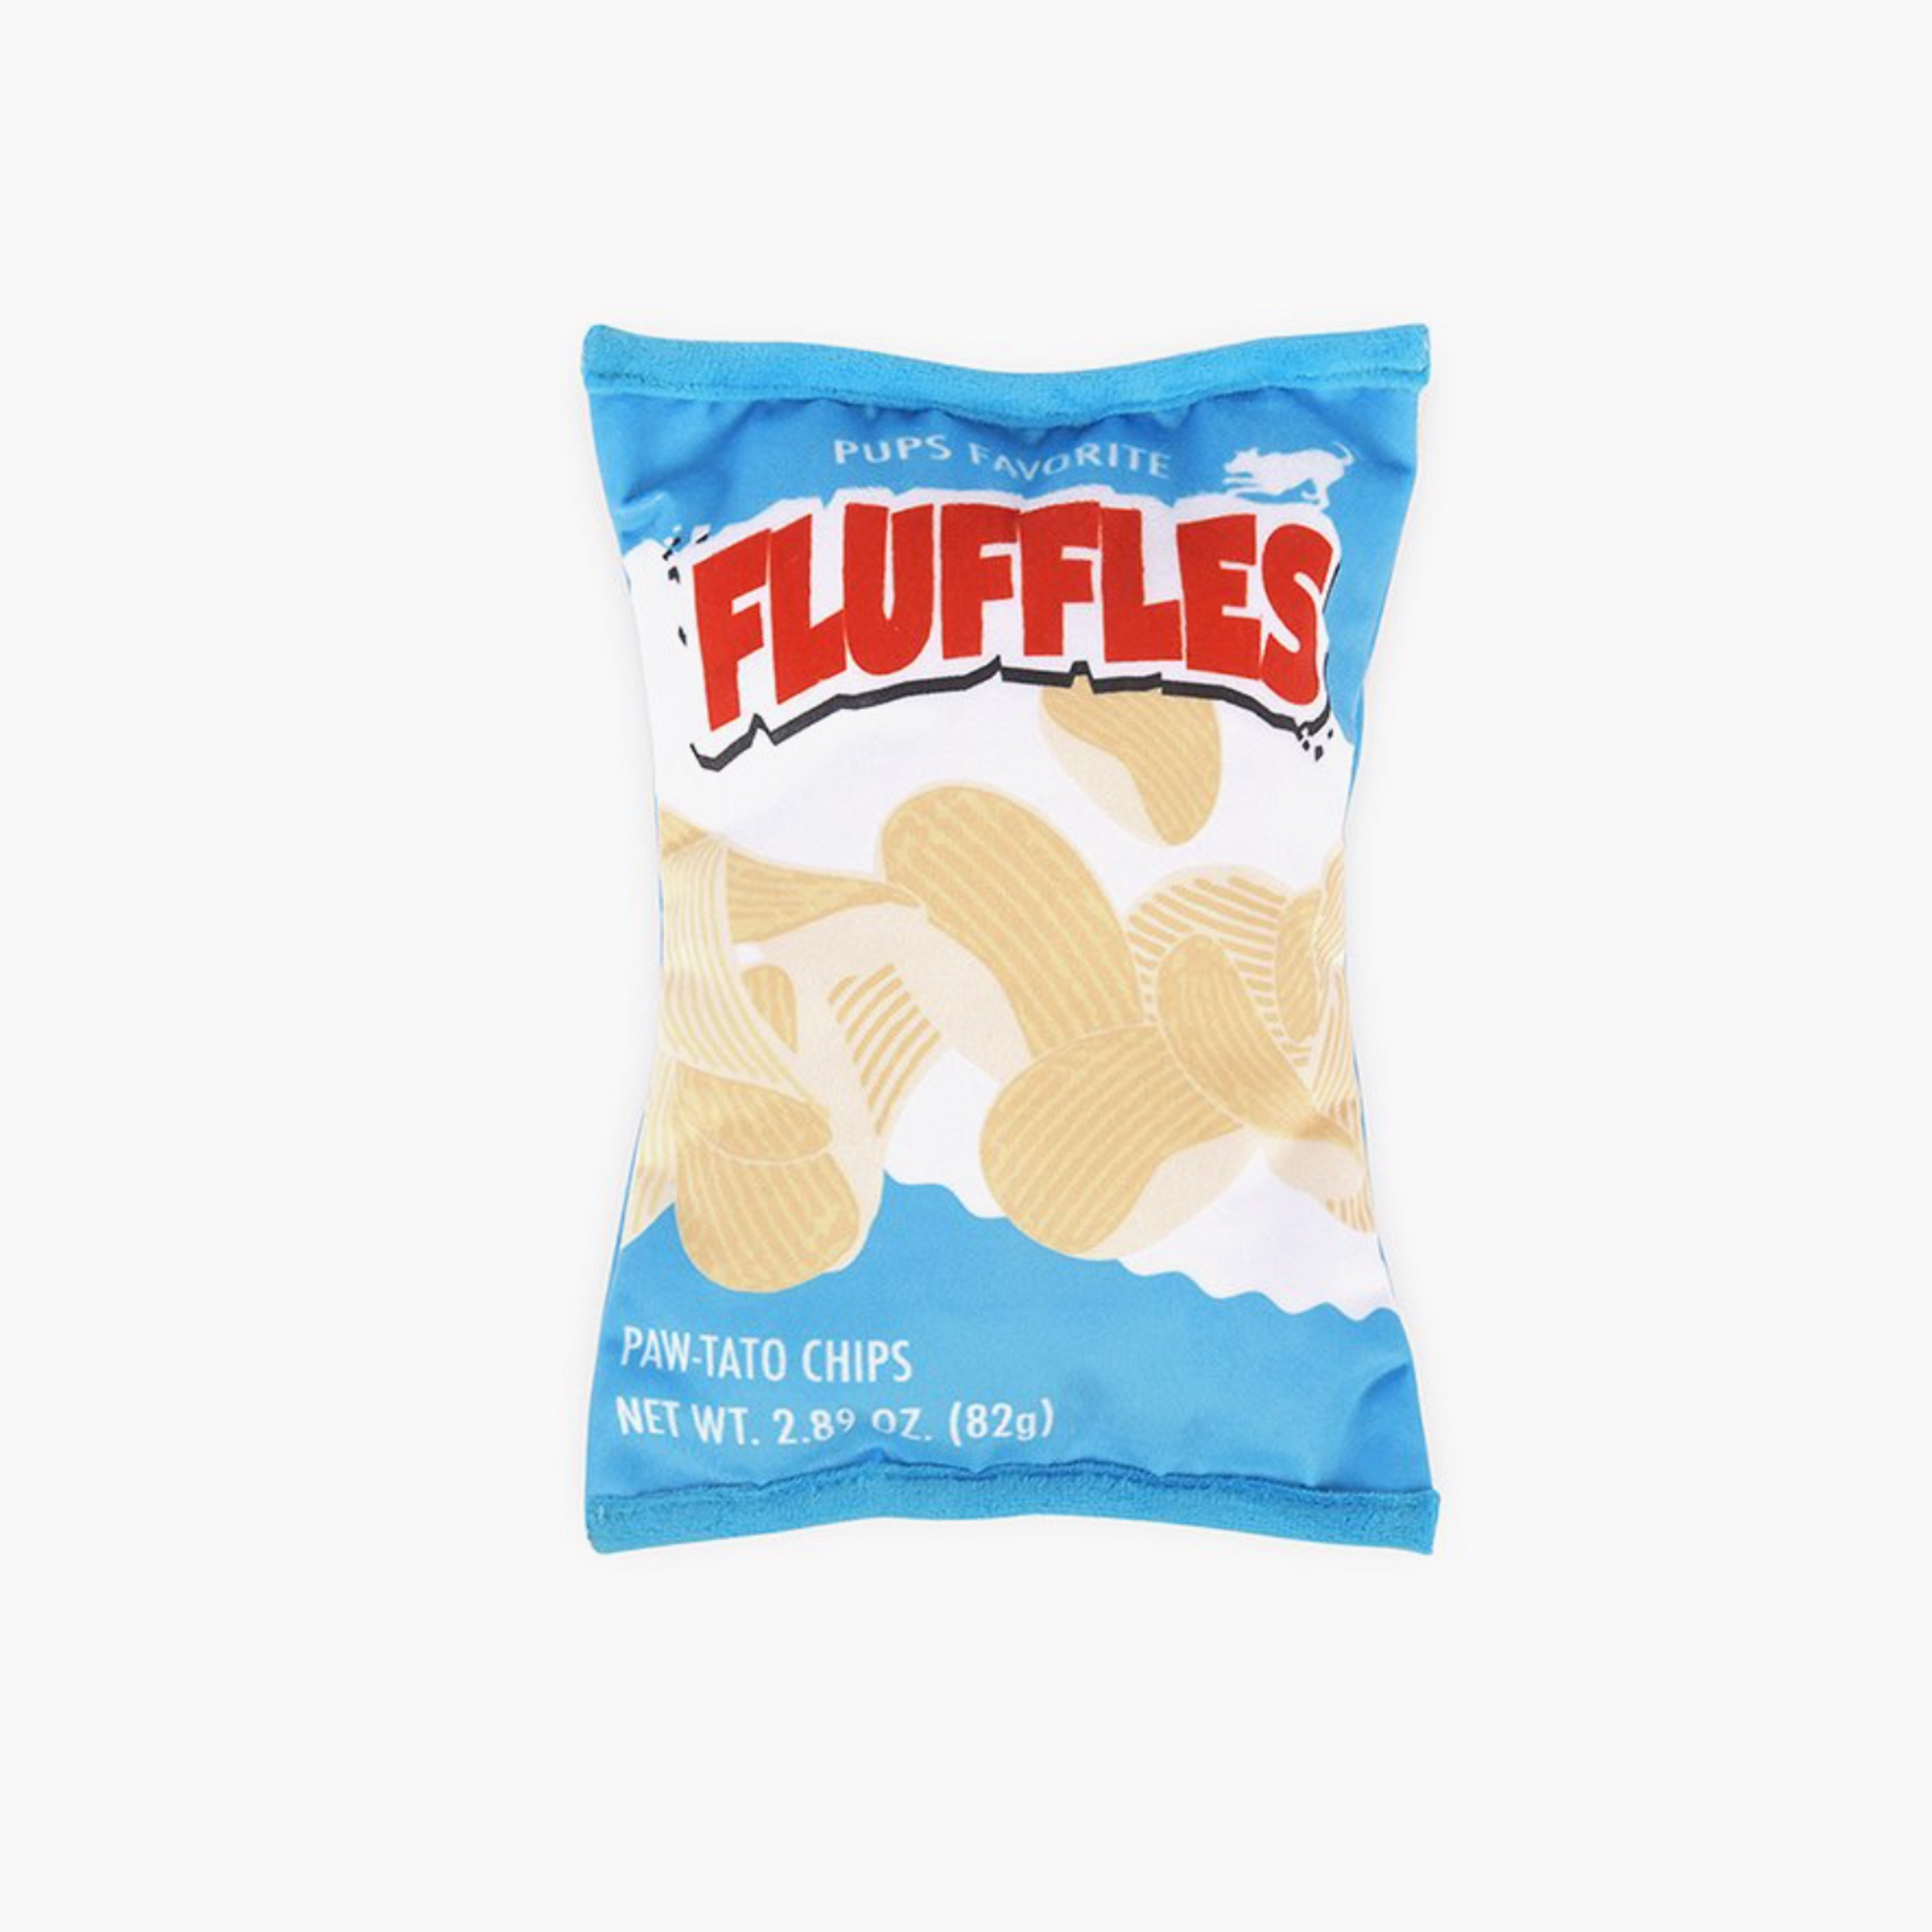 Fluffles Chips Plush Toy